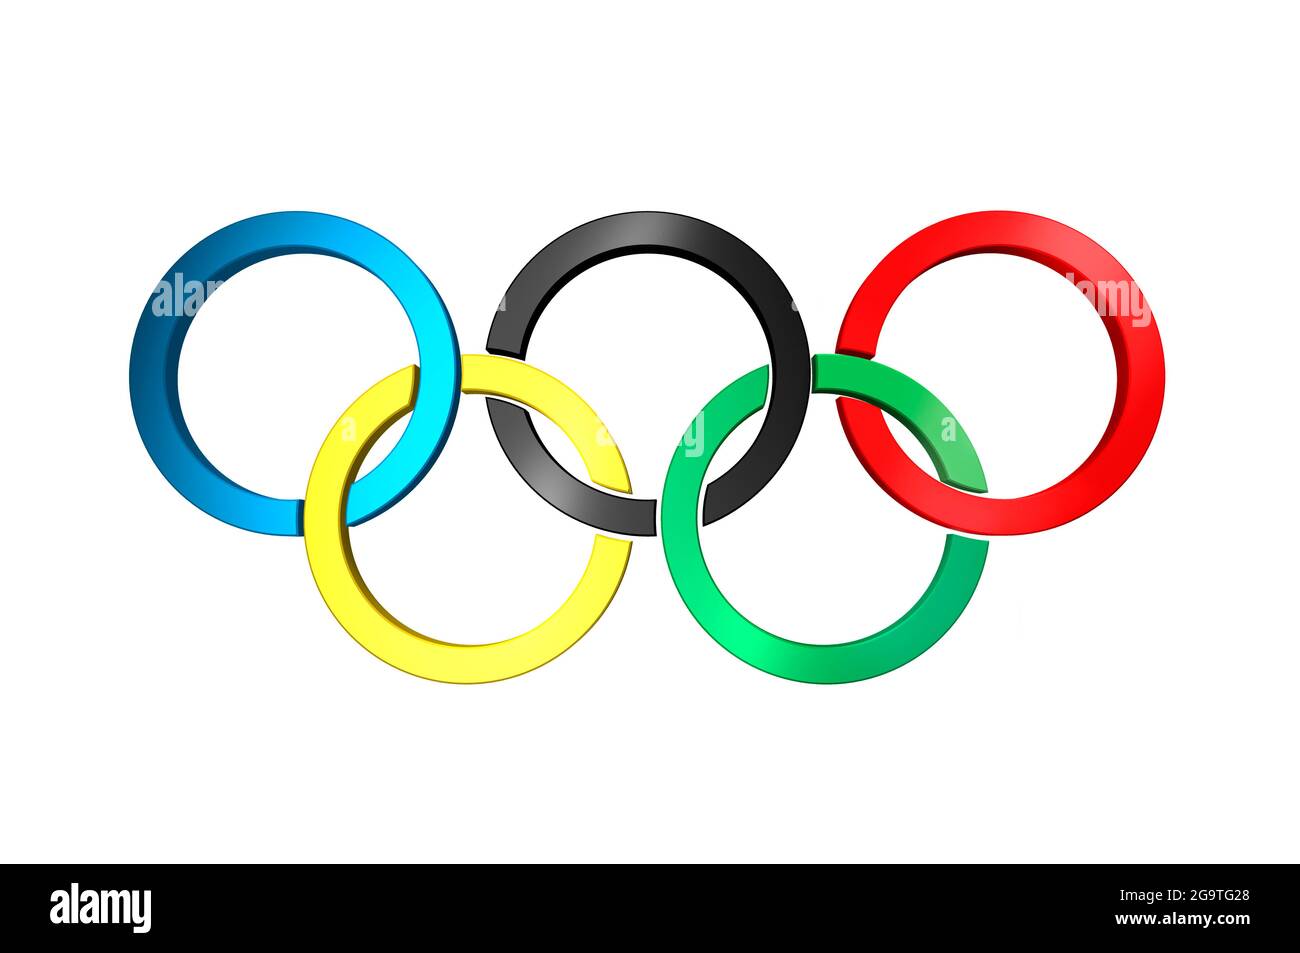 3D illustration of Olympic rings in their symbolic colors isolated on white background. Stock Photo